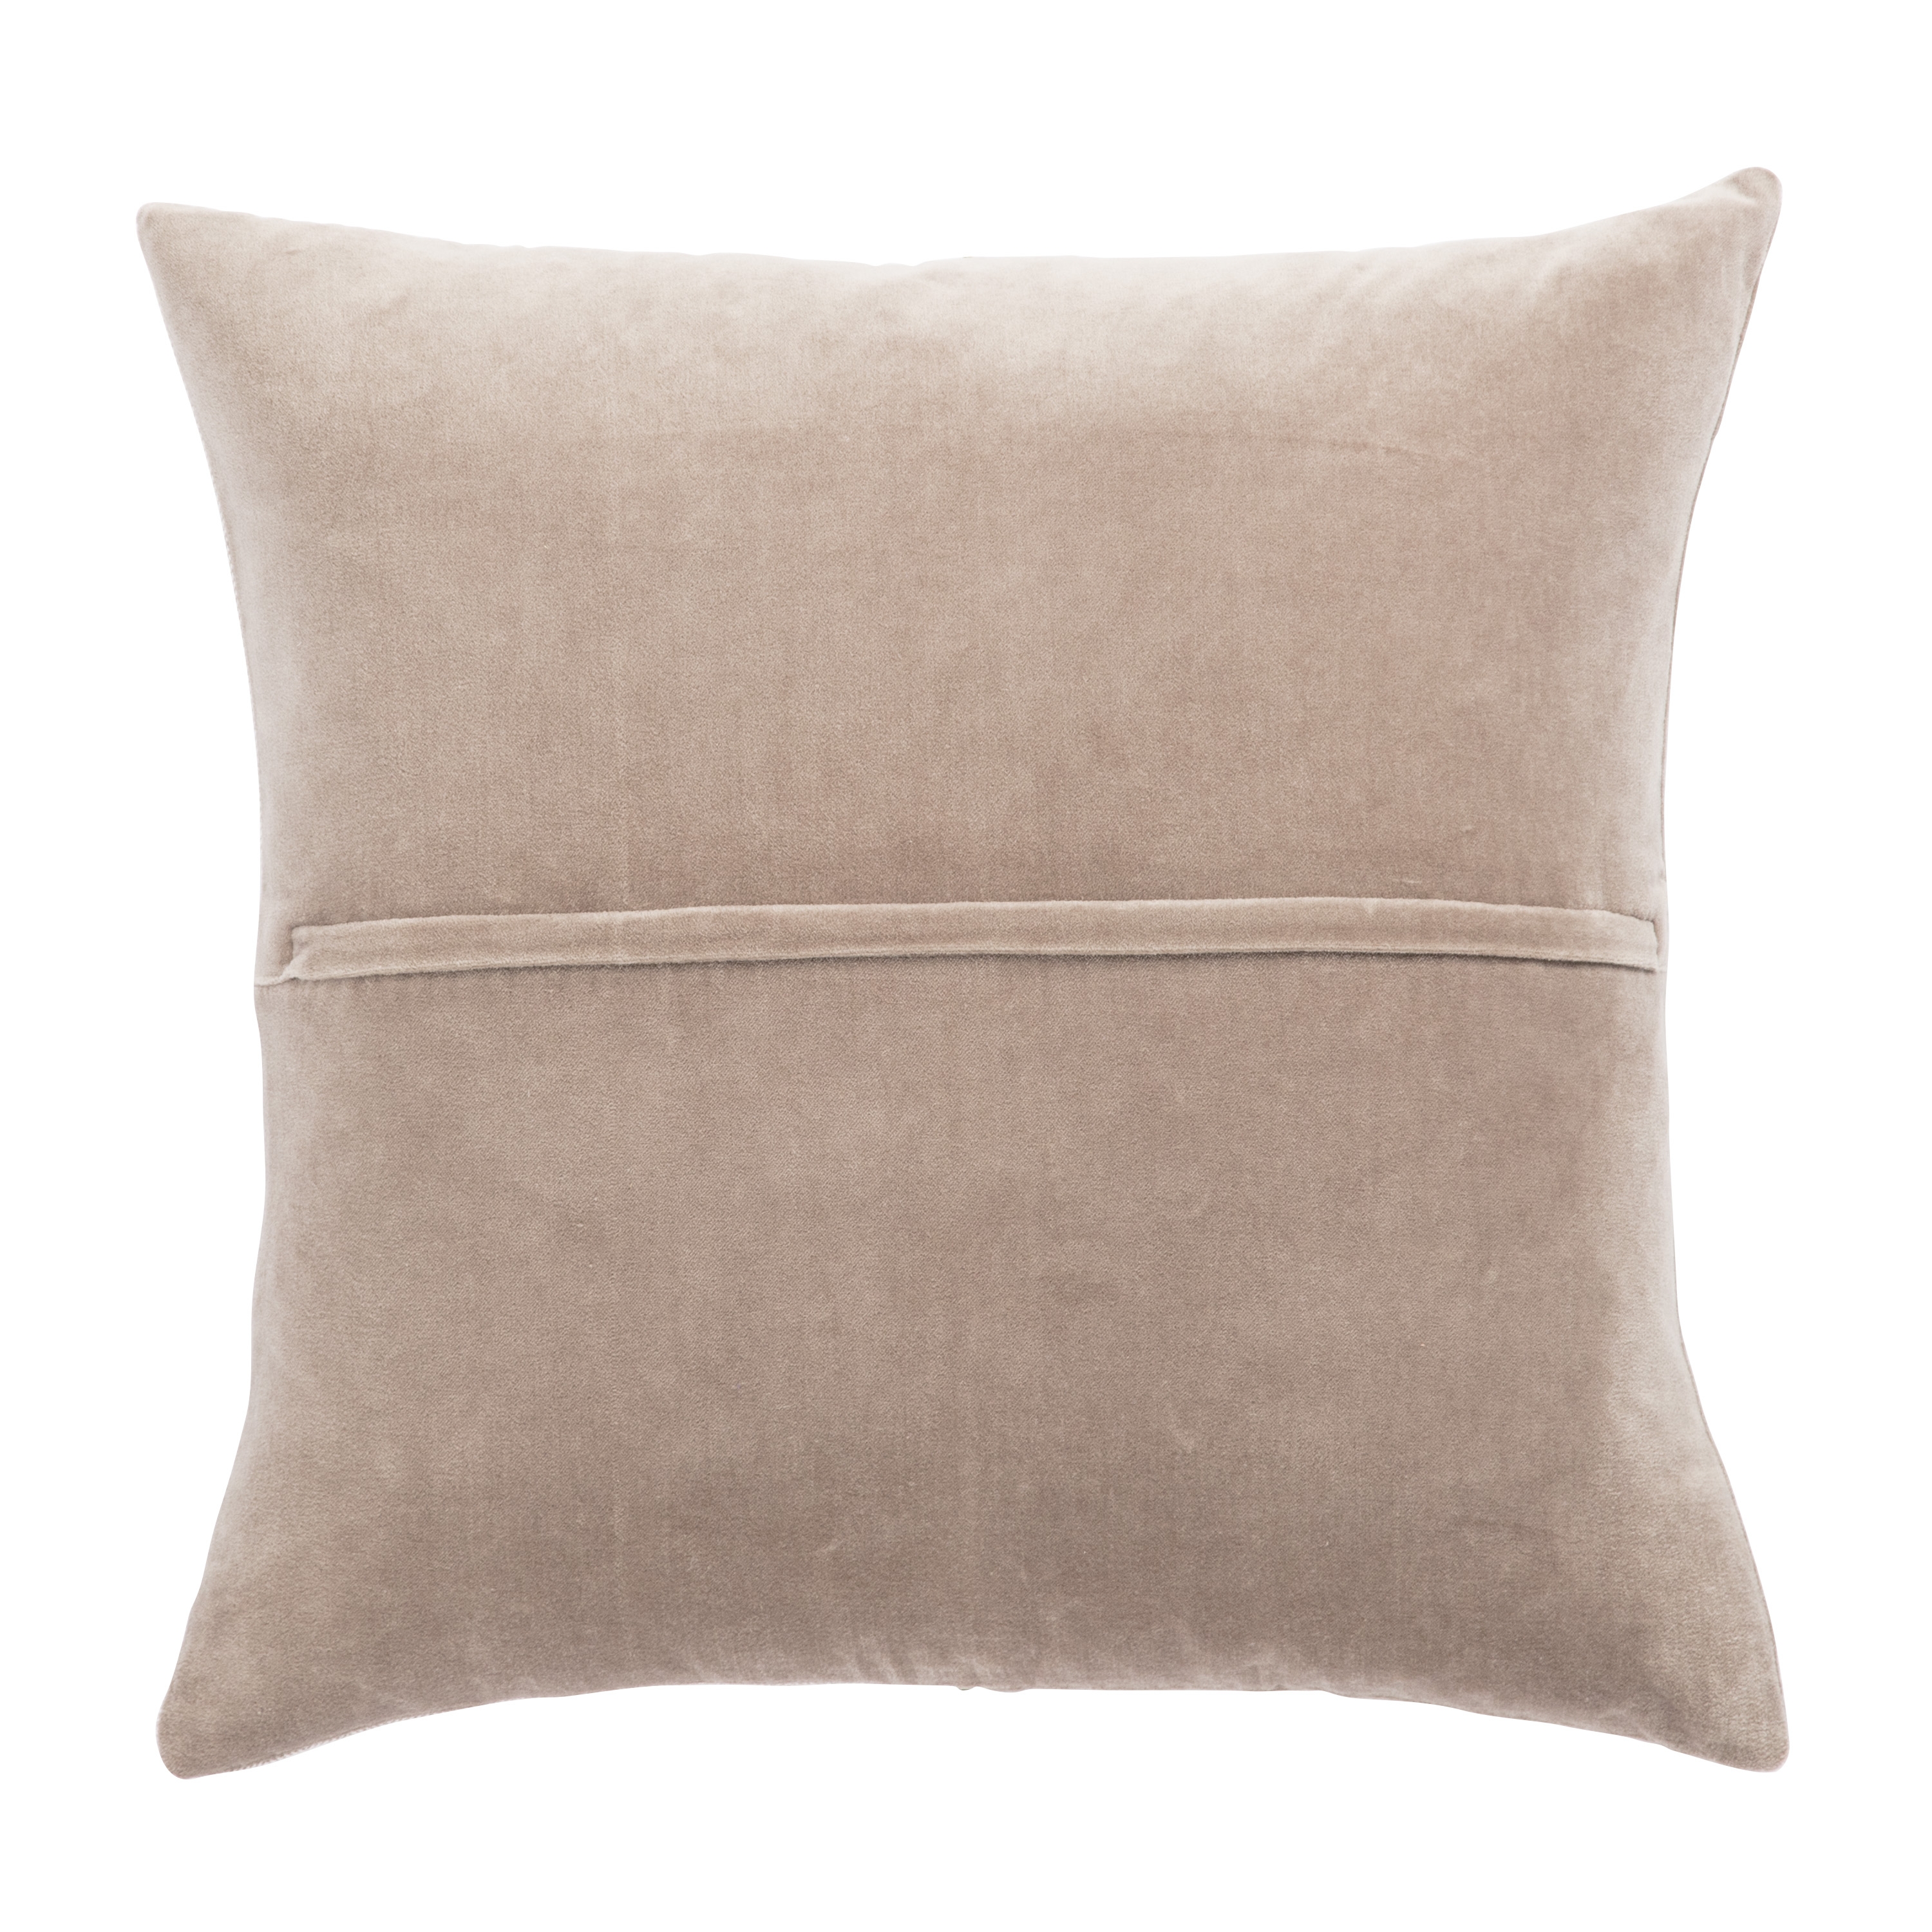 Discontinued - Brynn Pillow, 22" x 22" - Image 1